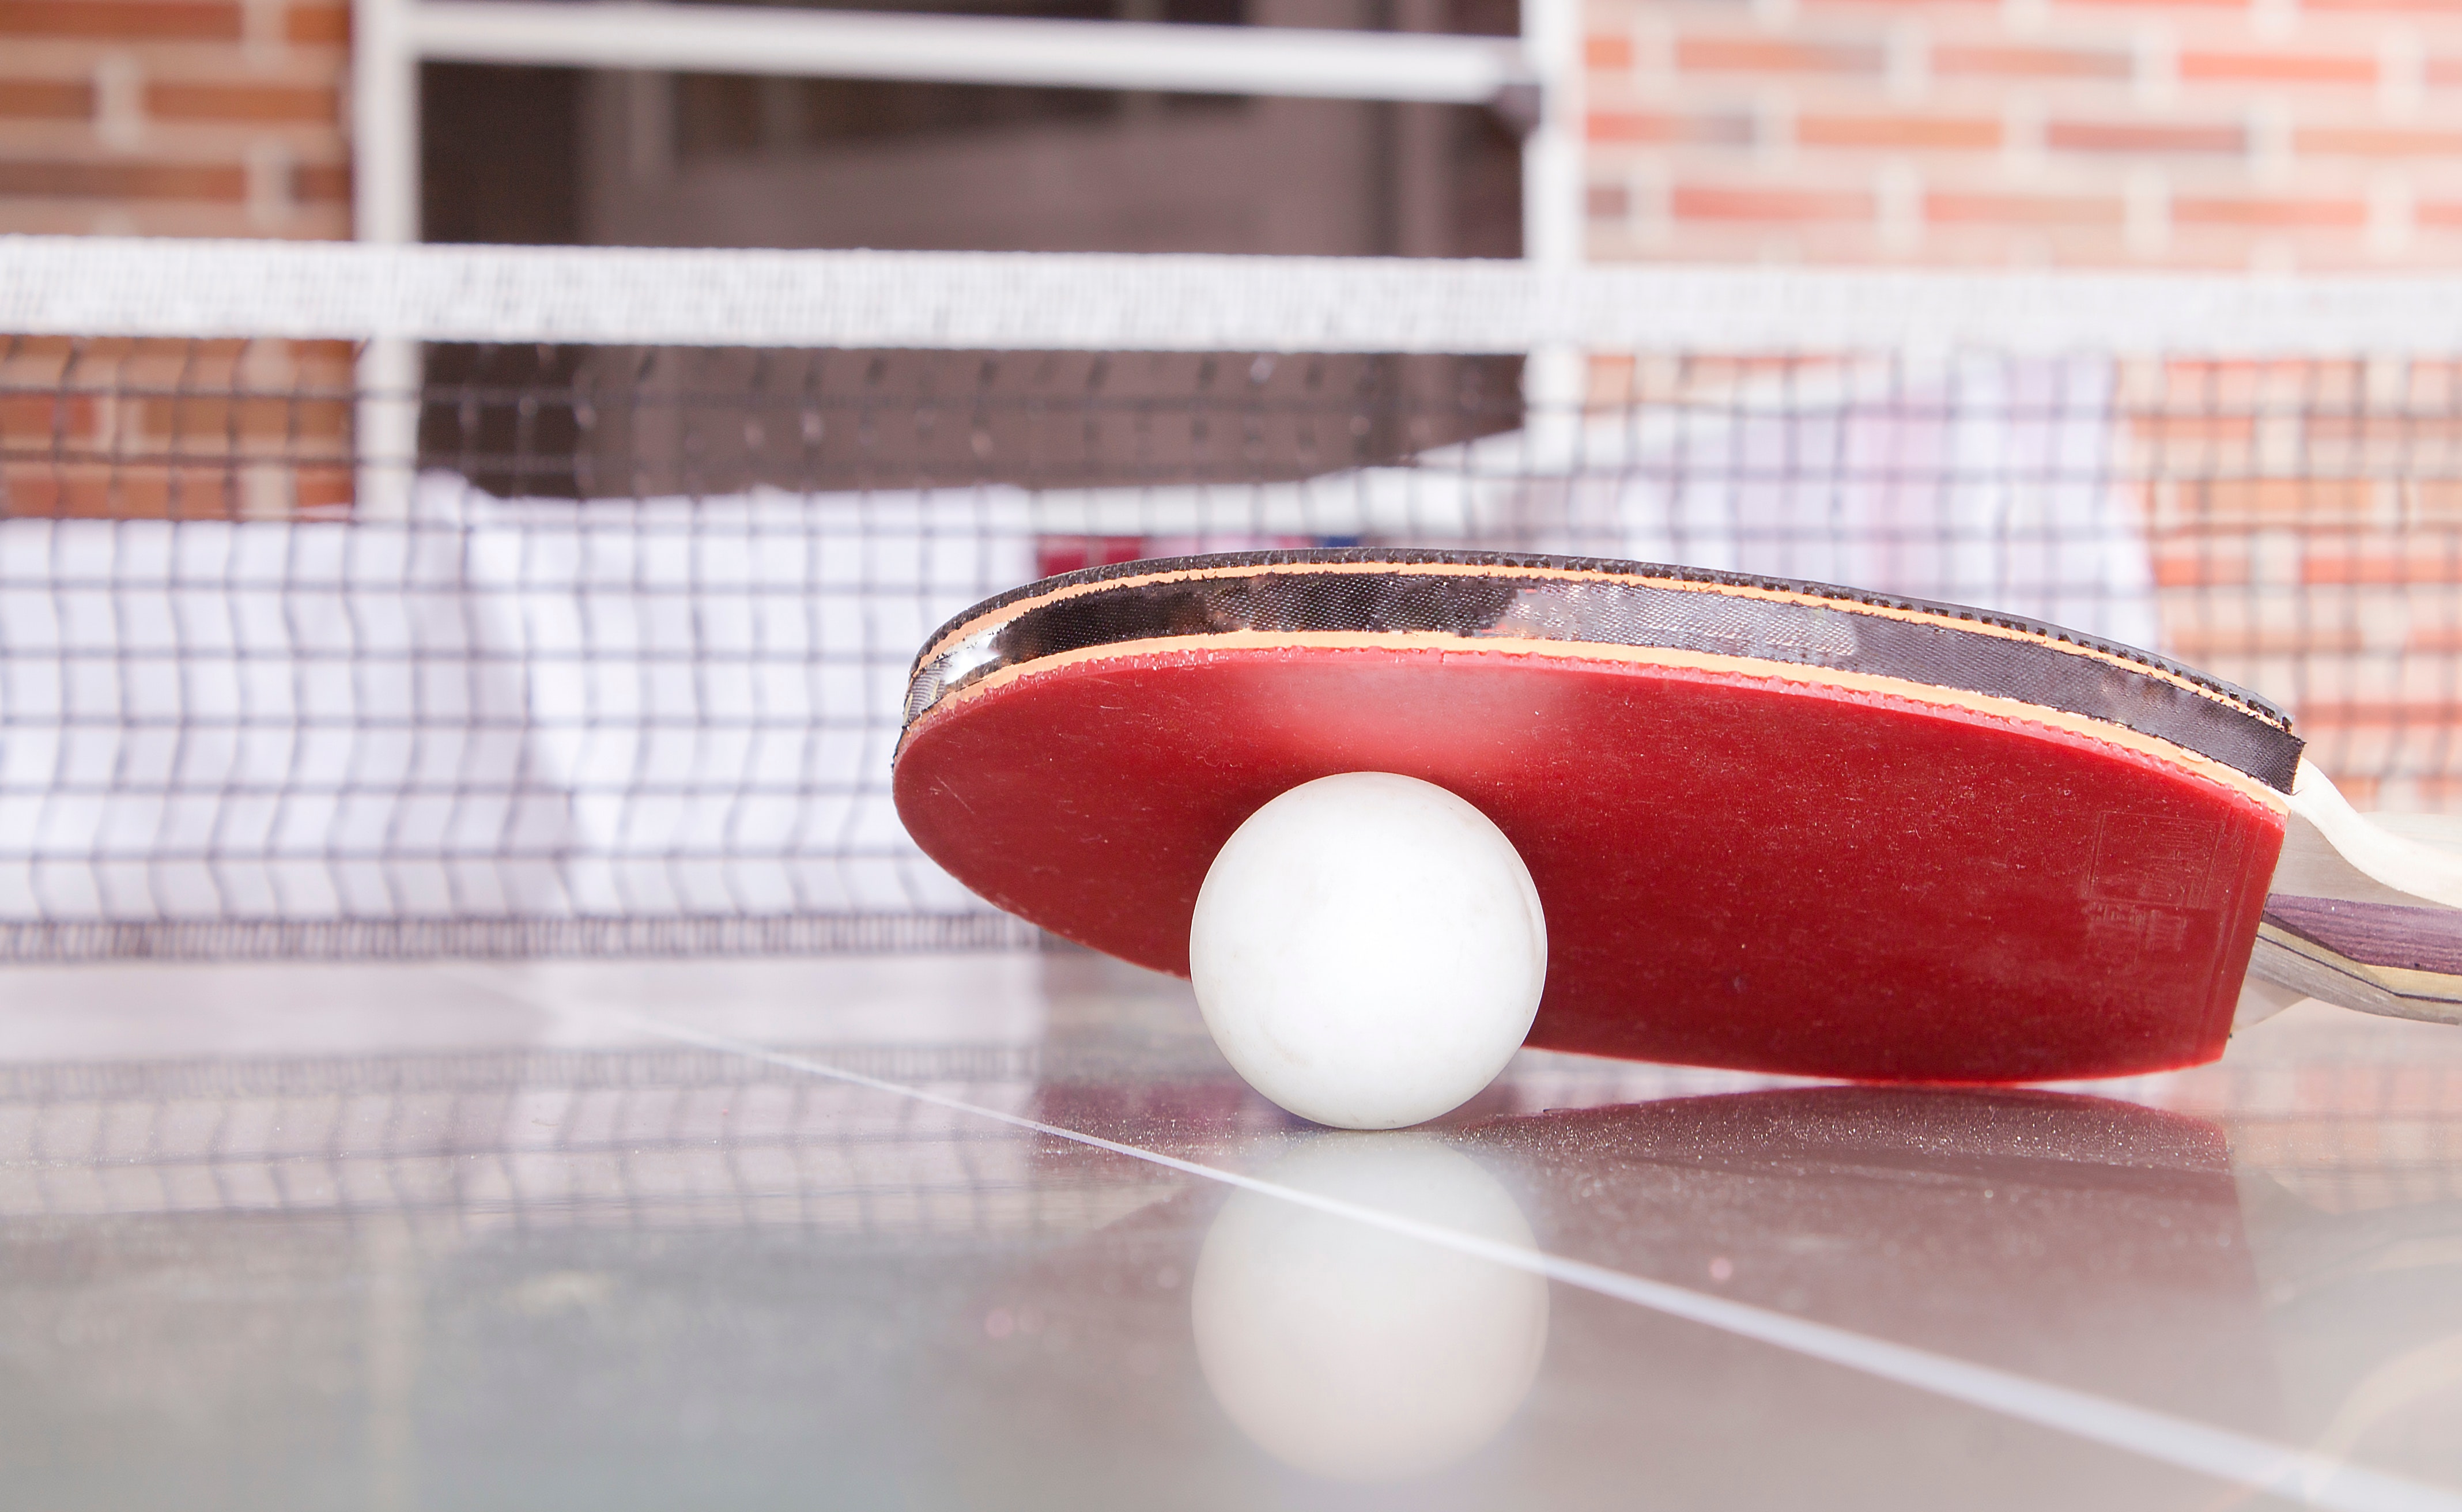 White pingpong ball beneath red table tennis paddle photo